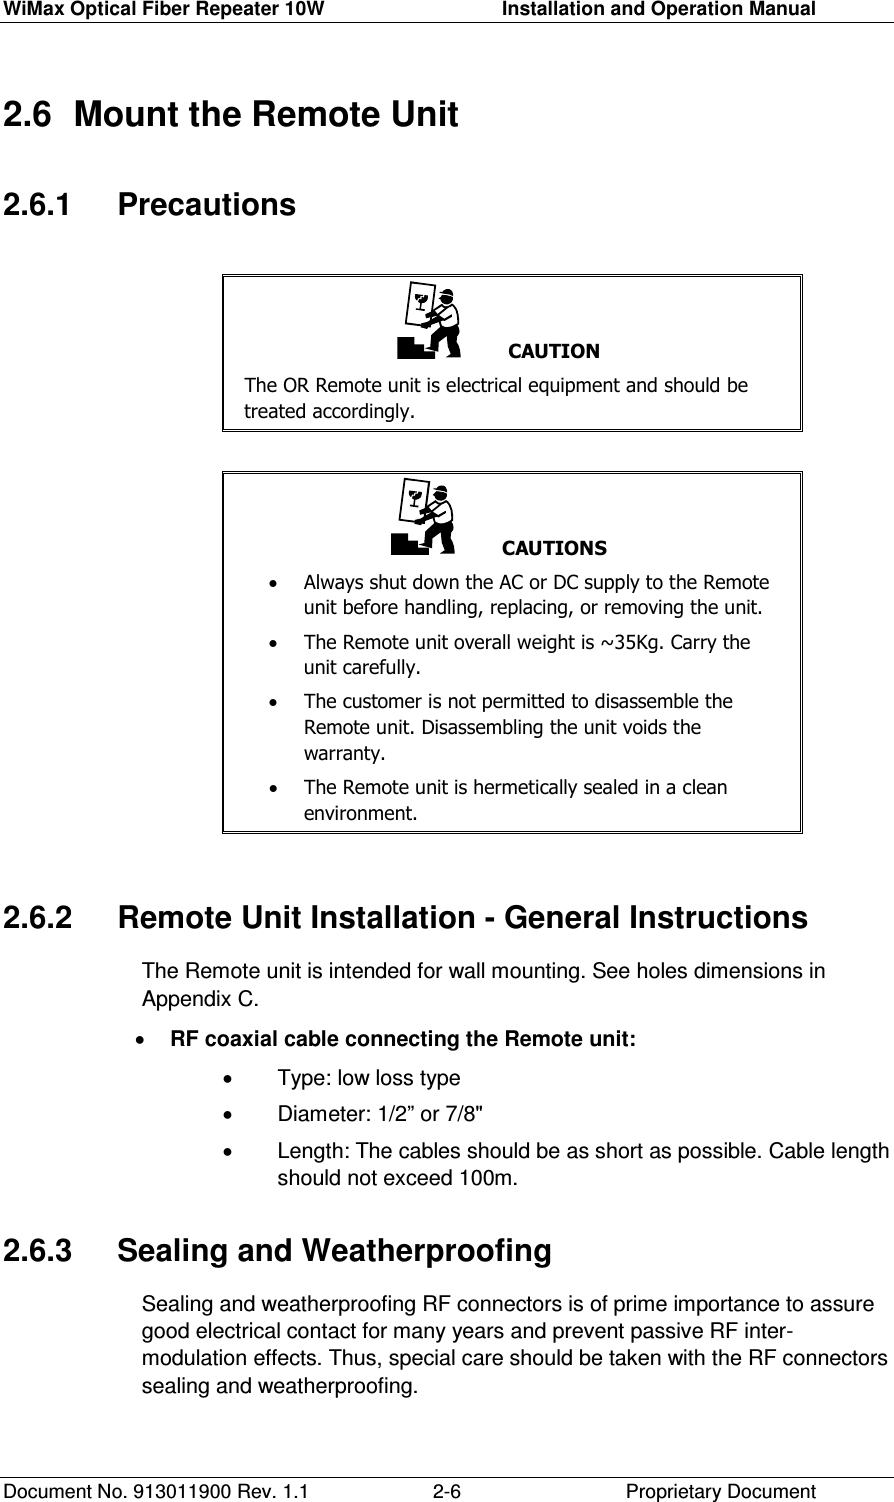 WiMax Optical Fiber Repeater 10W     Installation and Operation Manual Document No. 913011900 Rev. 1.1    Proprietary Document  2-62.6  Mount the Remote Unit 2.6.1   Precautions     CAUTION The OR Remote unit is electrical equipment and should be treated accordingly.       CAUTIONS •  Always shut down the AC or DC supply to the Remote unit before handling, replacing, or removing the unit. •  The Remote unit overall weight is ~35Kg. Carry the unit carefully.  •  The customer is not permitted to disassemble the Remote unit. Disassembling the unit voids the warranty. •  The Remote unit is hermetically sealed in a clean environment.   2.6.2   Remote Unit Installation - General Instructions The Remote unit is intended for wall mounting. See holes dimensions in Appendix C. •  RF coaxial cable connecting the Remote unit: •  Type: low loss type •  Diameter: 1/2” or 7/8&quot; •  Length: The cables should be as short as possible. Cable length should not exceed 100m. 2.6.3   Sealing and Weatherproofing  Sealing and weatherproofing RF connectors is of prime importance to assure good electrical contact for many years and prevent passive RF inter-modulation effects. Thus, special care should be taken with the RF connectors sealing and weatherproofing. 